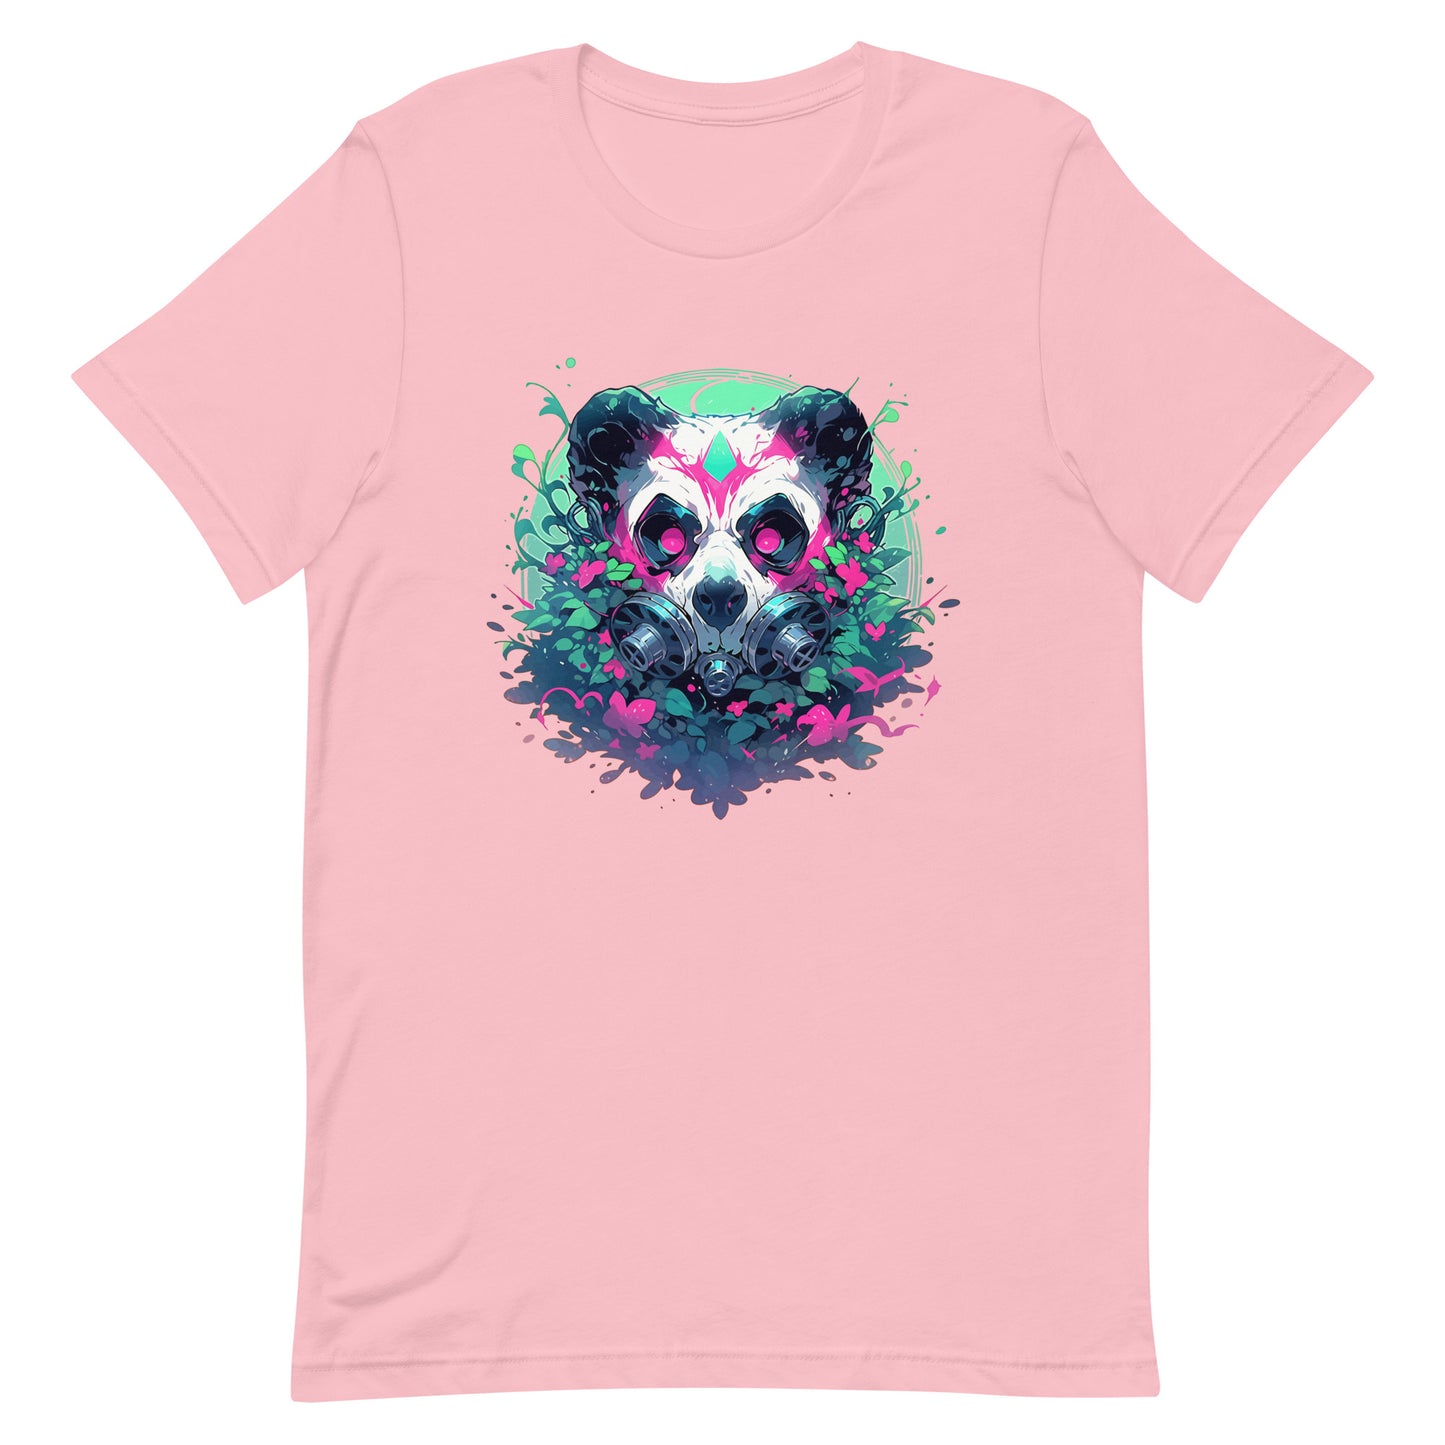 Cool toxic panda, Post-apocalyptic jungle, Wild animal with pink eyes, Bamboo bear in gas mask, Black and white bear - Unisex t-shirt